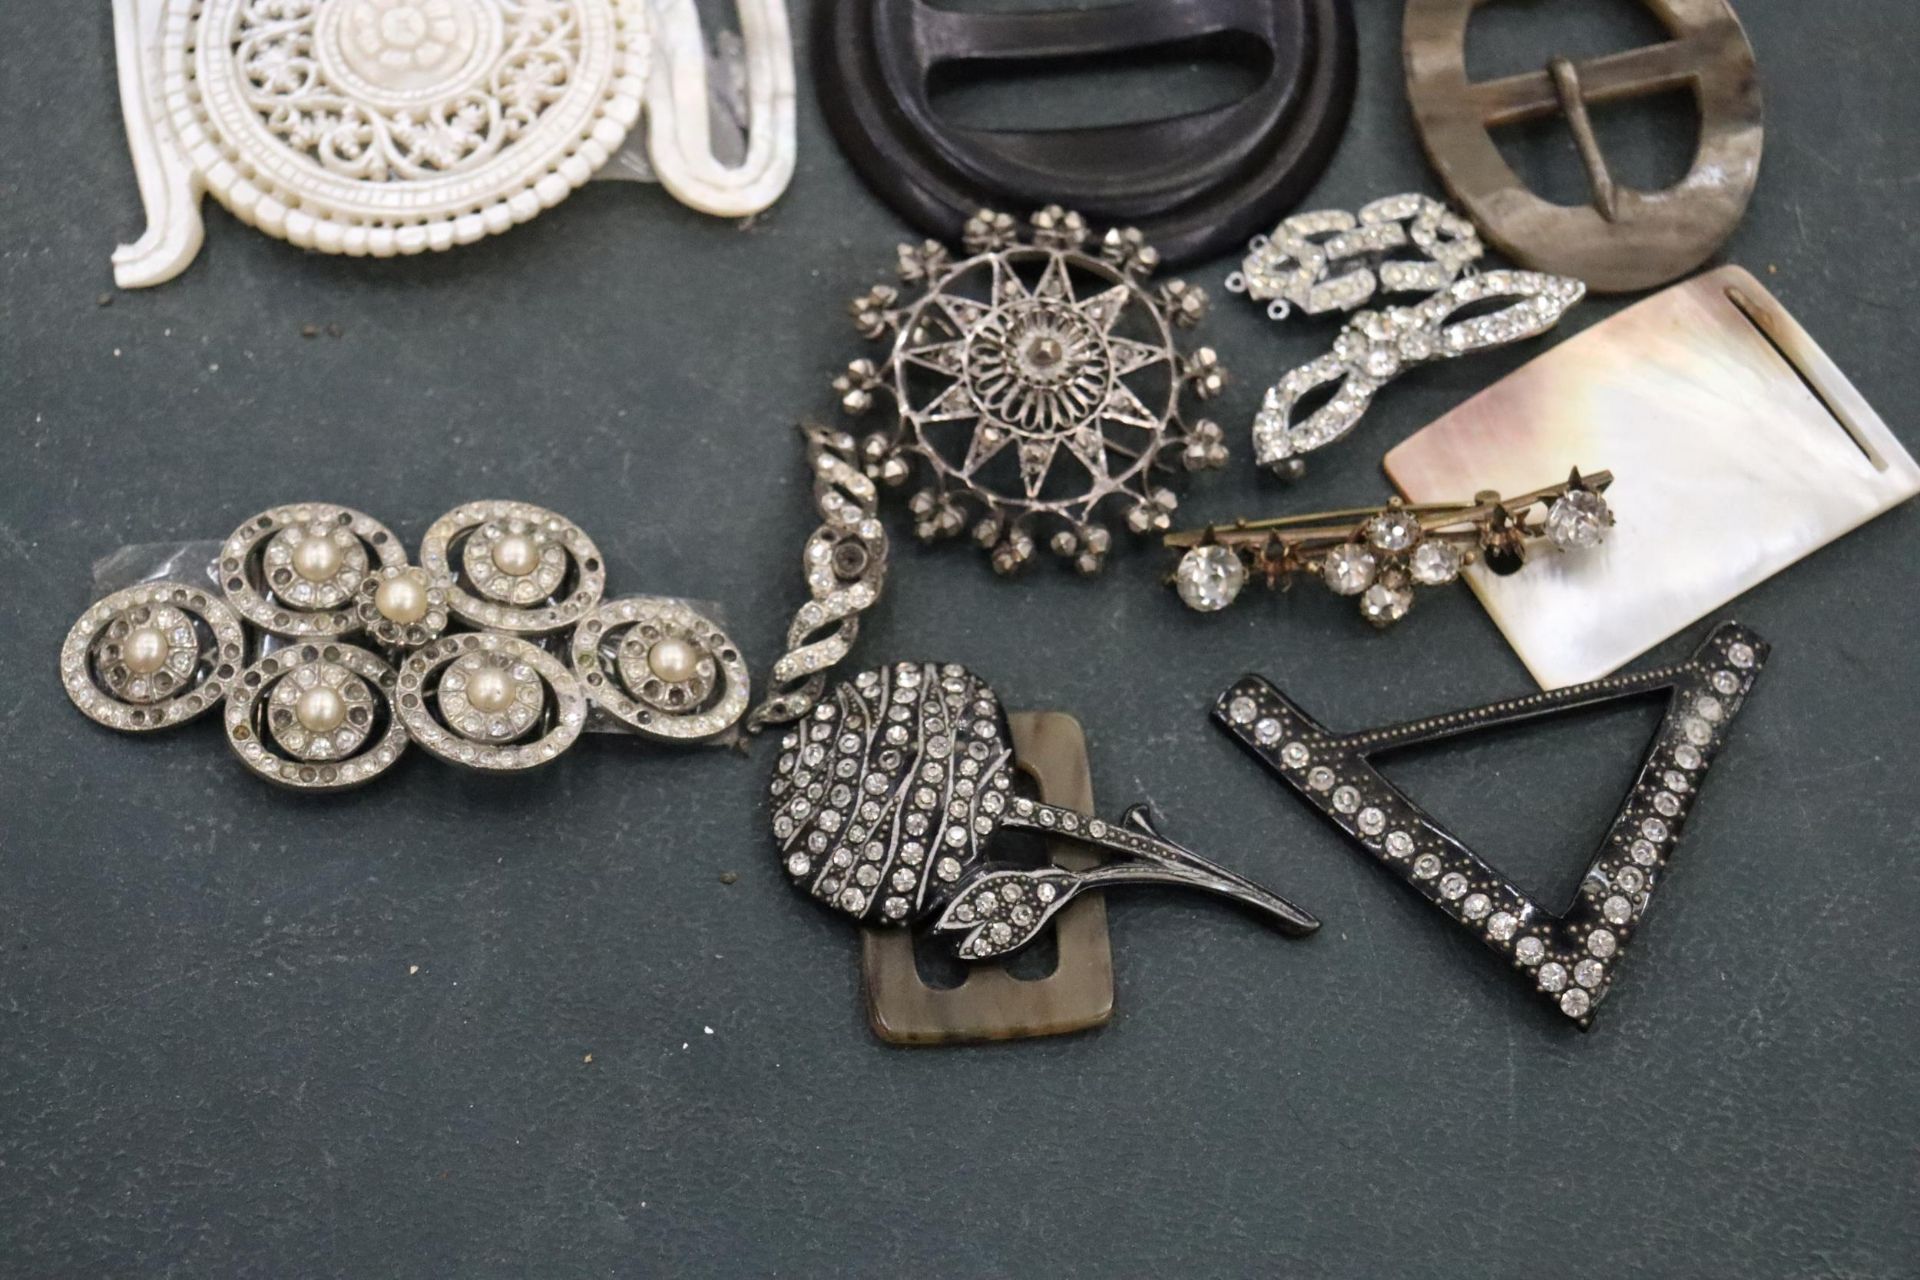 A QUANTITY OF VINTAGE BUCKLES, BROOCHES, ETC - Image 3 of 5